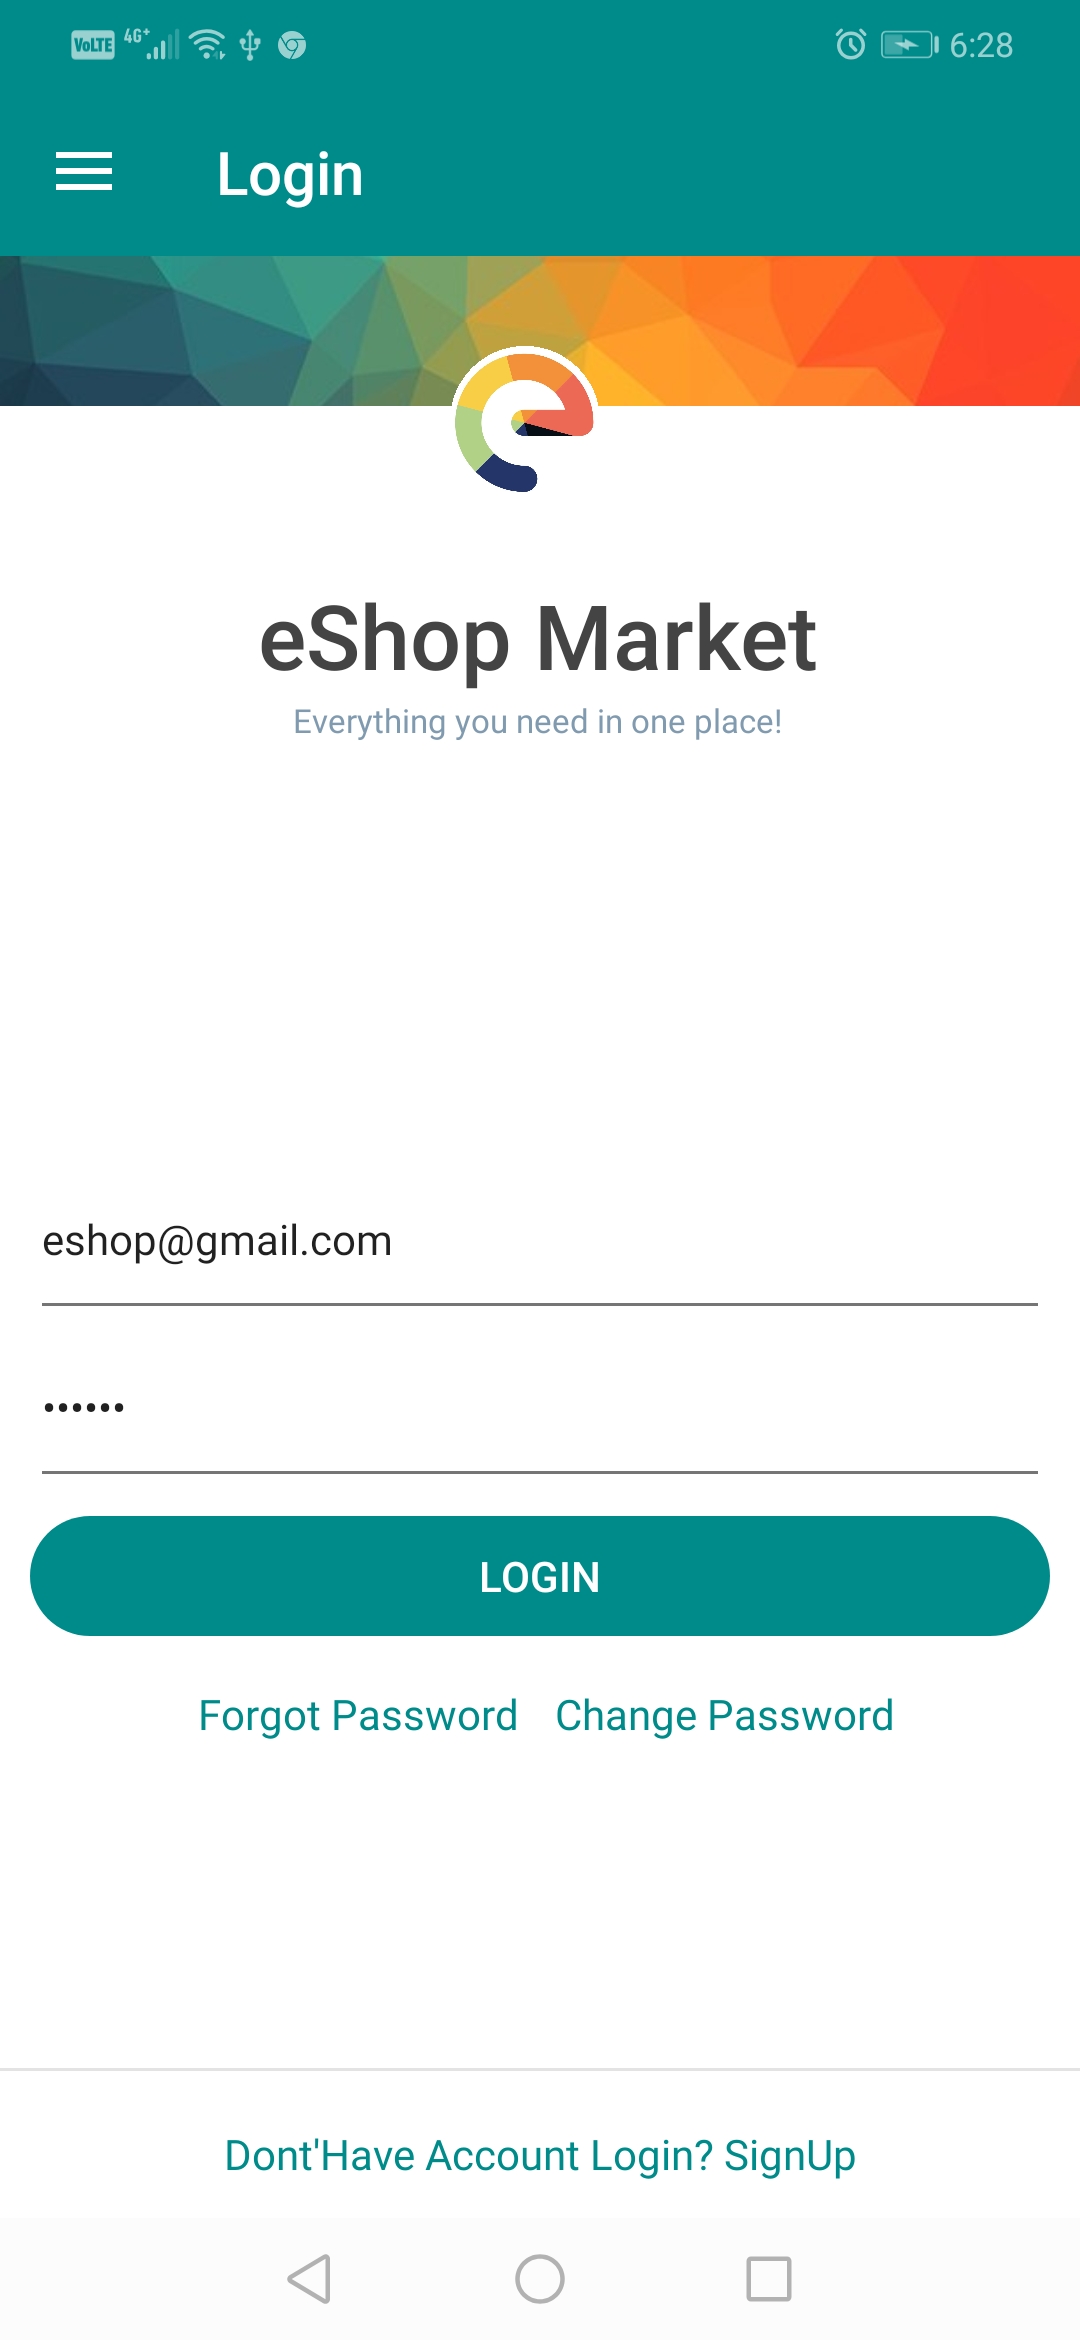 eShop Mobile App, Restful API and Admin Site Using Xamarin Forms and MVC - Full Source Code - 5